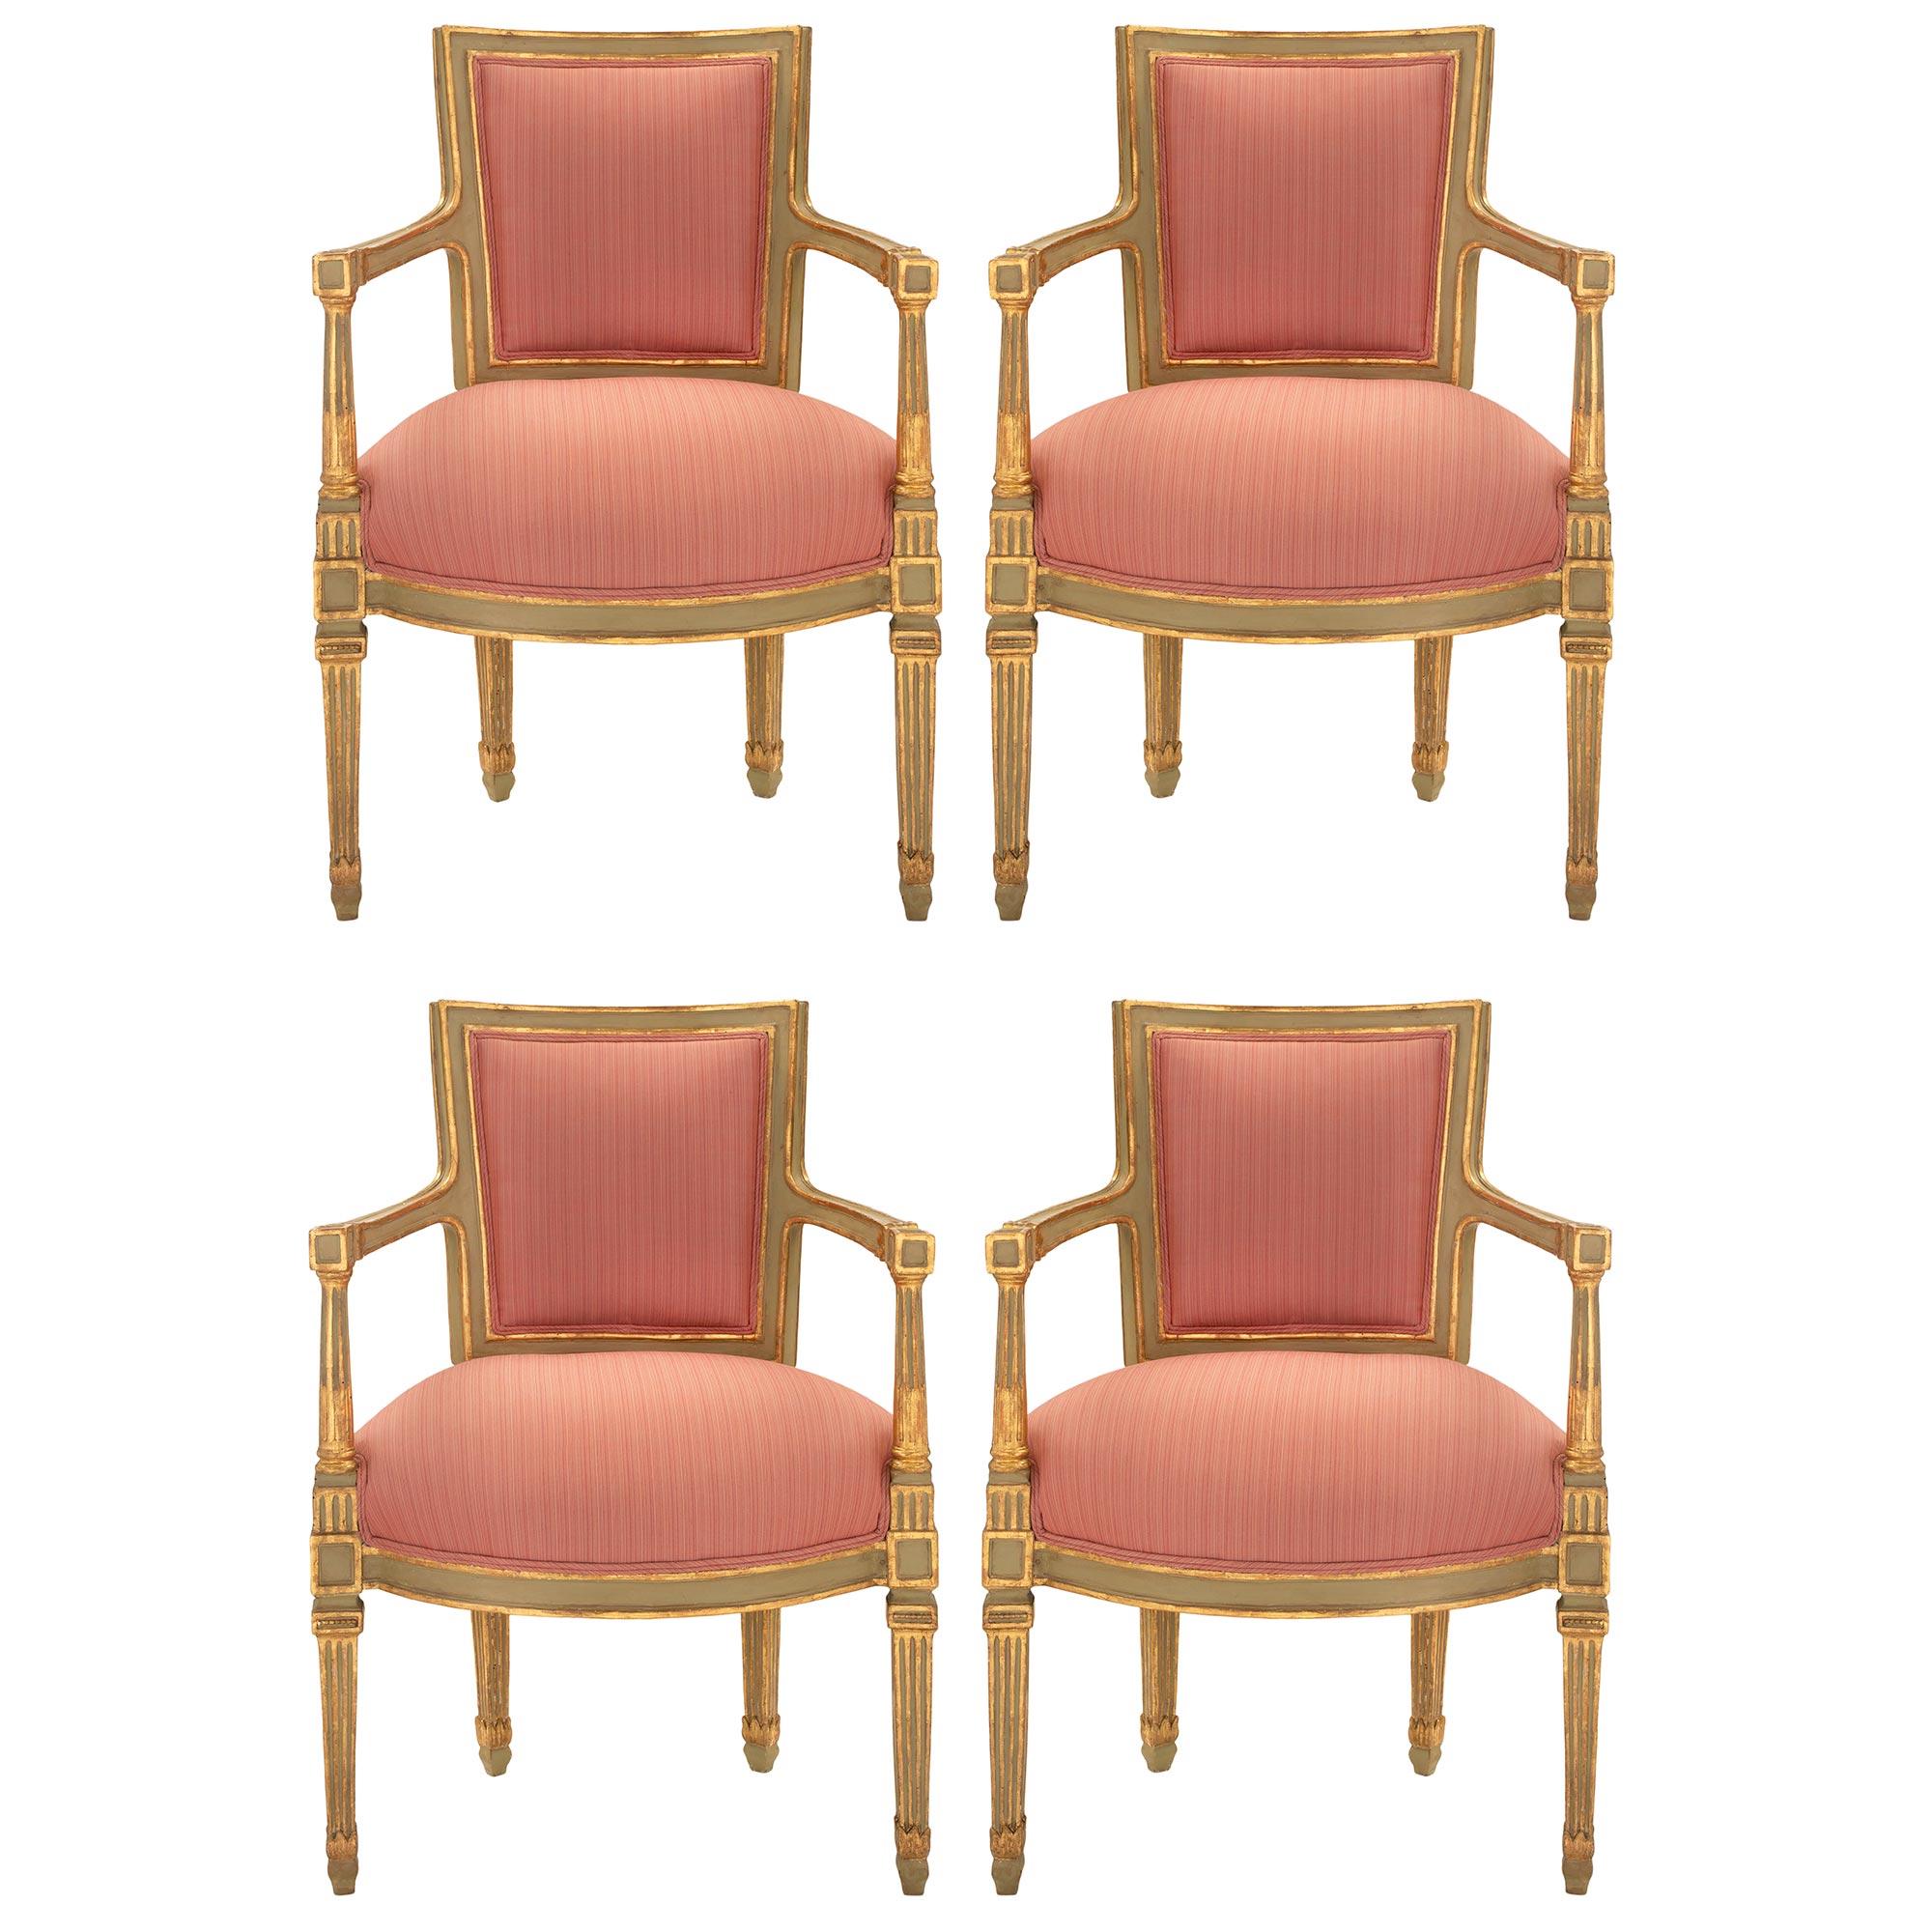 A striking and complete set of Italian 18th century Louis XVI period patinated and giltwood four armchairs and their matching settee, from Naples. Each is raised by elegant square tapered fluted giltwood and patinated legs. Above each leg are block